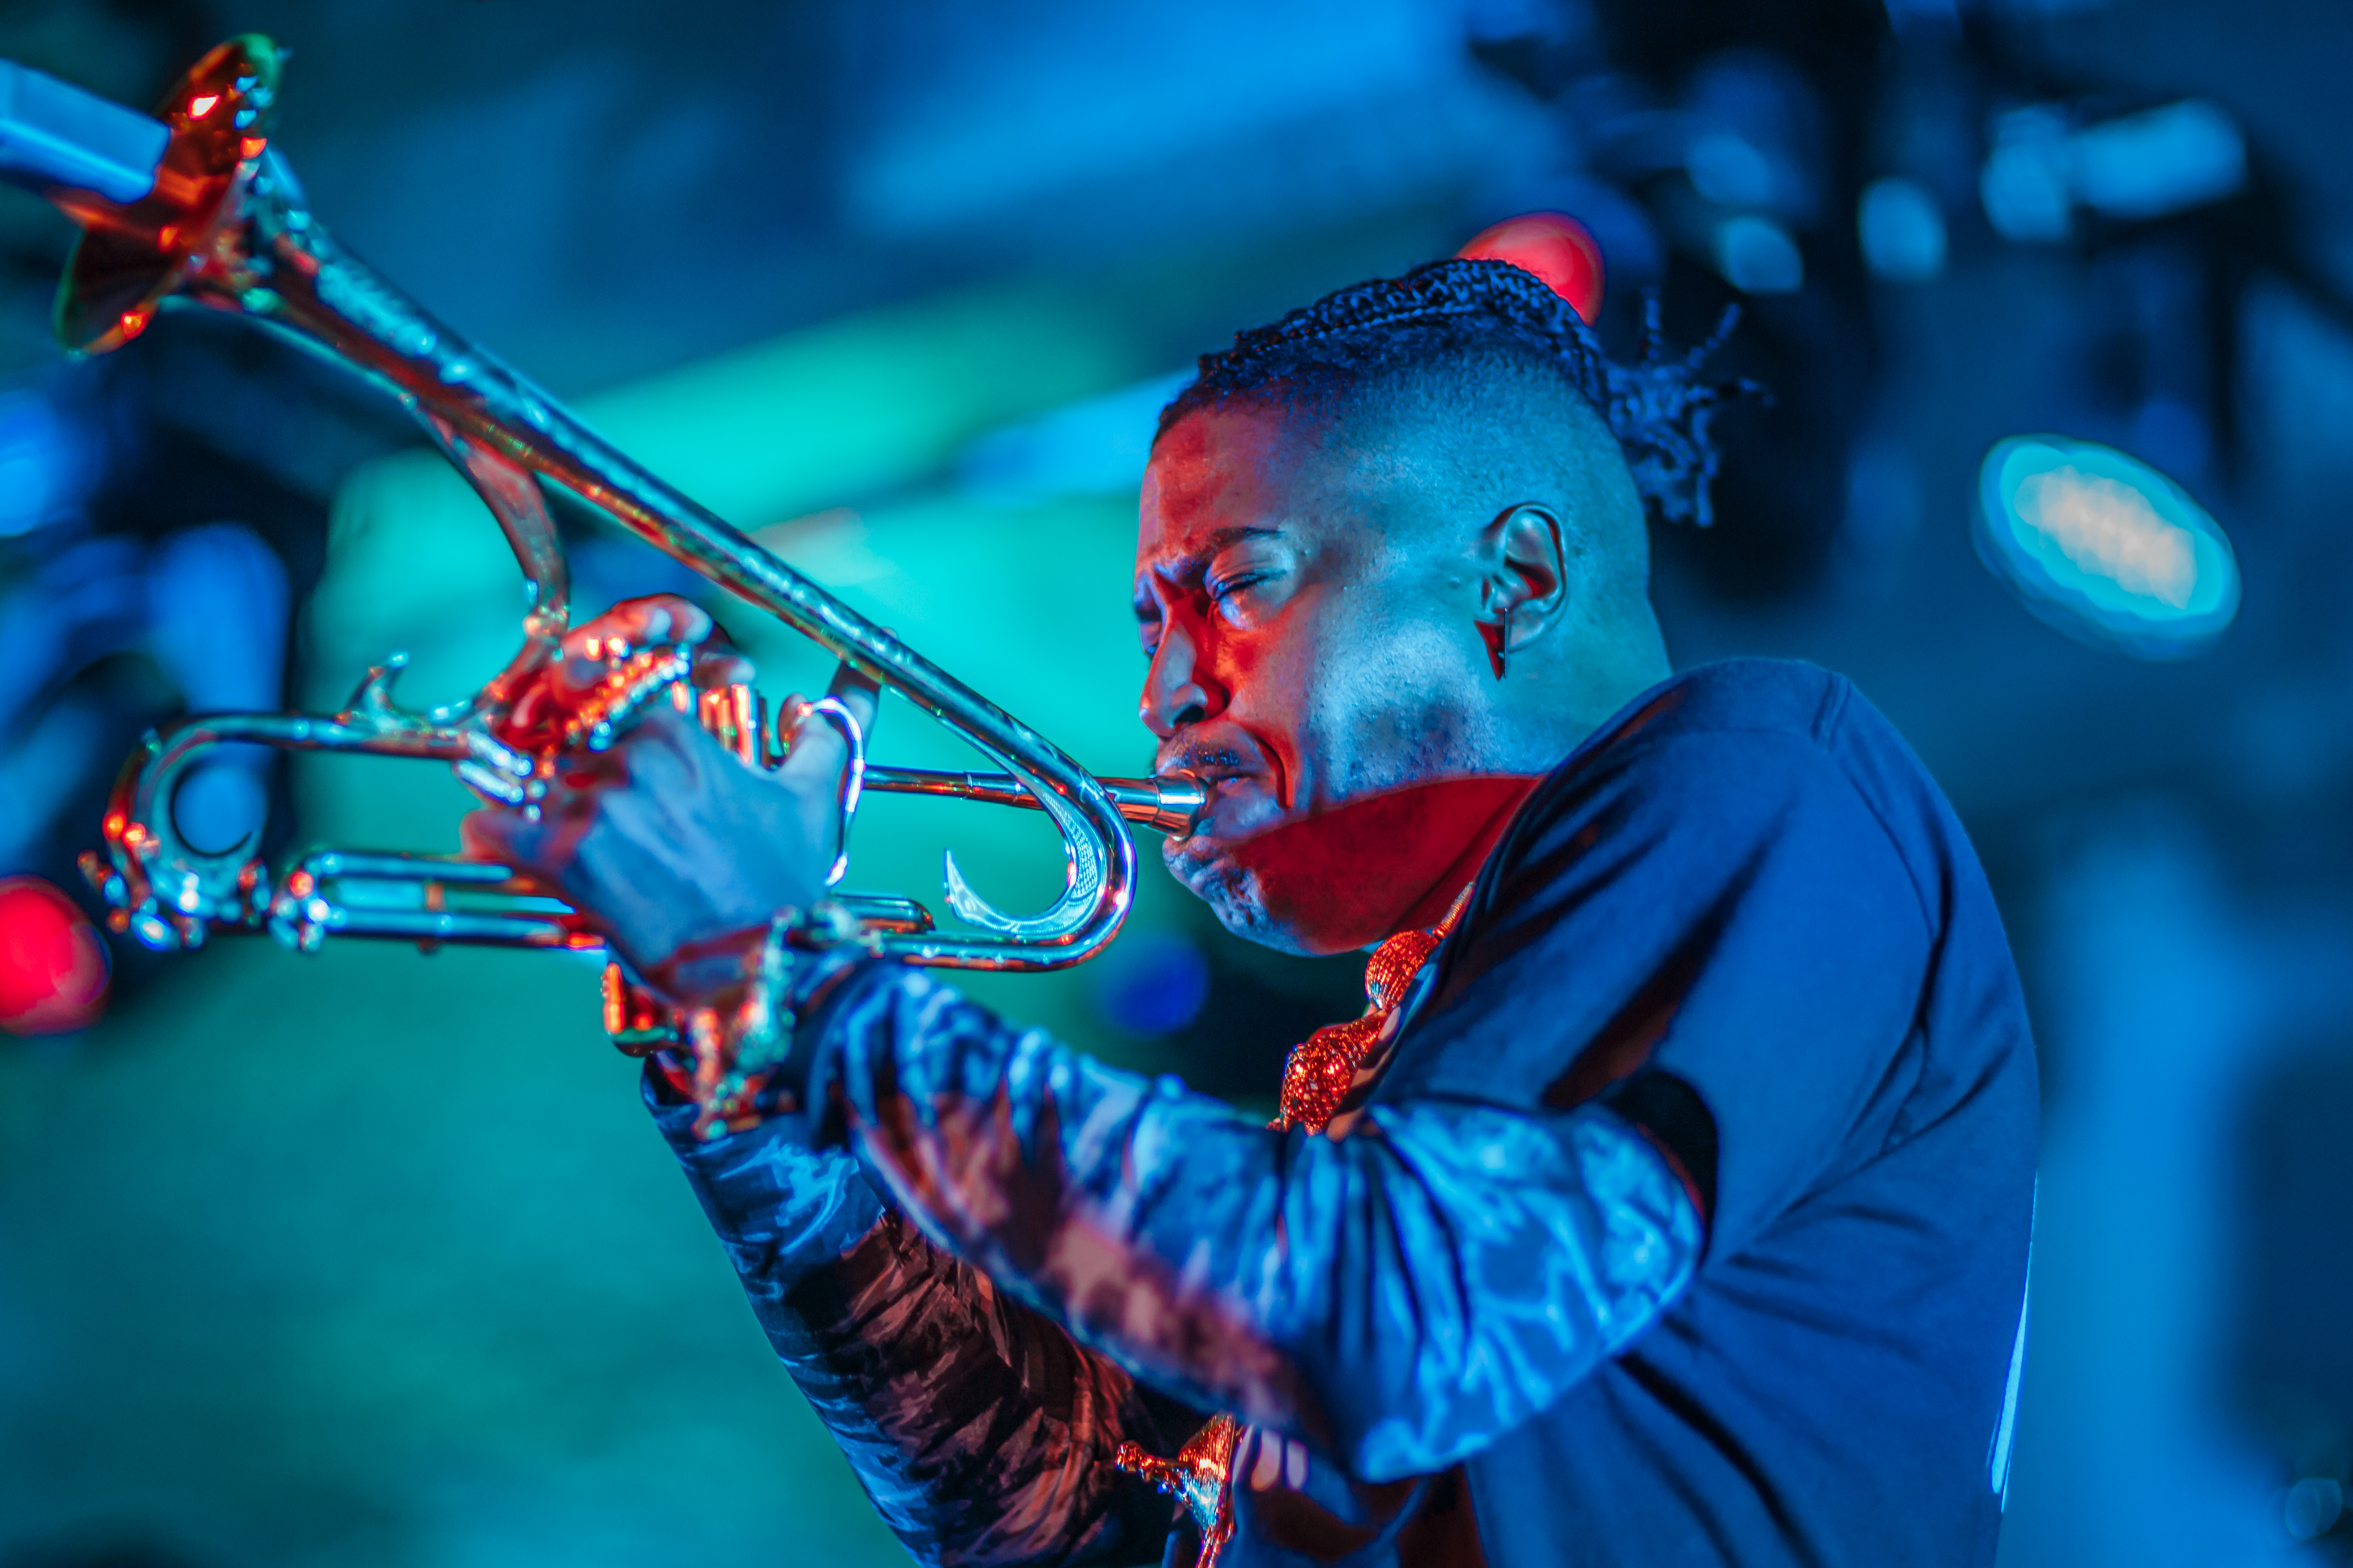 Trumpeter taken at Ground Up Music Festival in Miami, Florida 2 7a6d4198 c07e 49f4 903a 88e64512b049